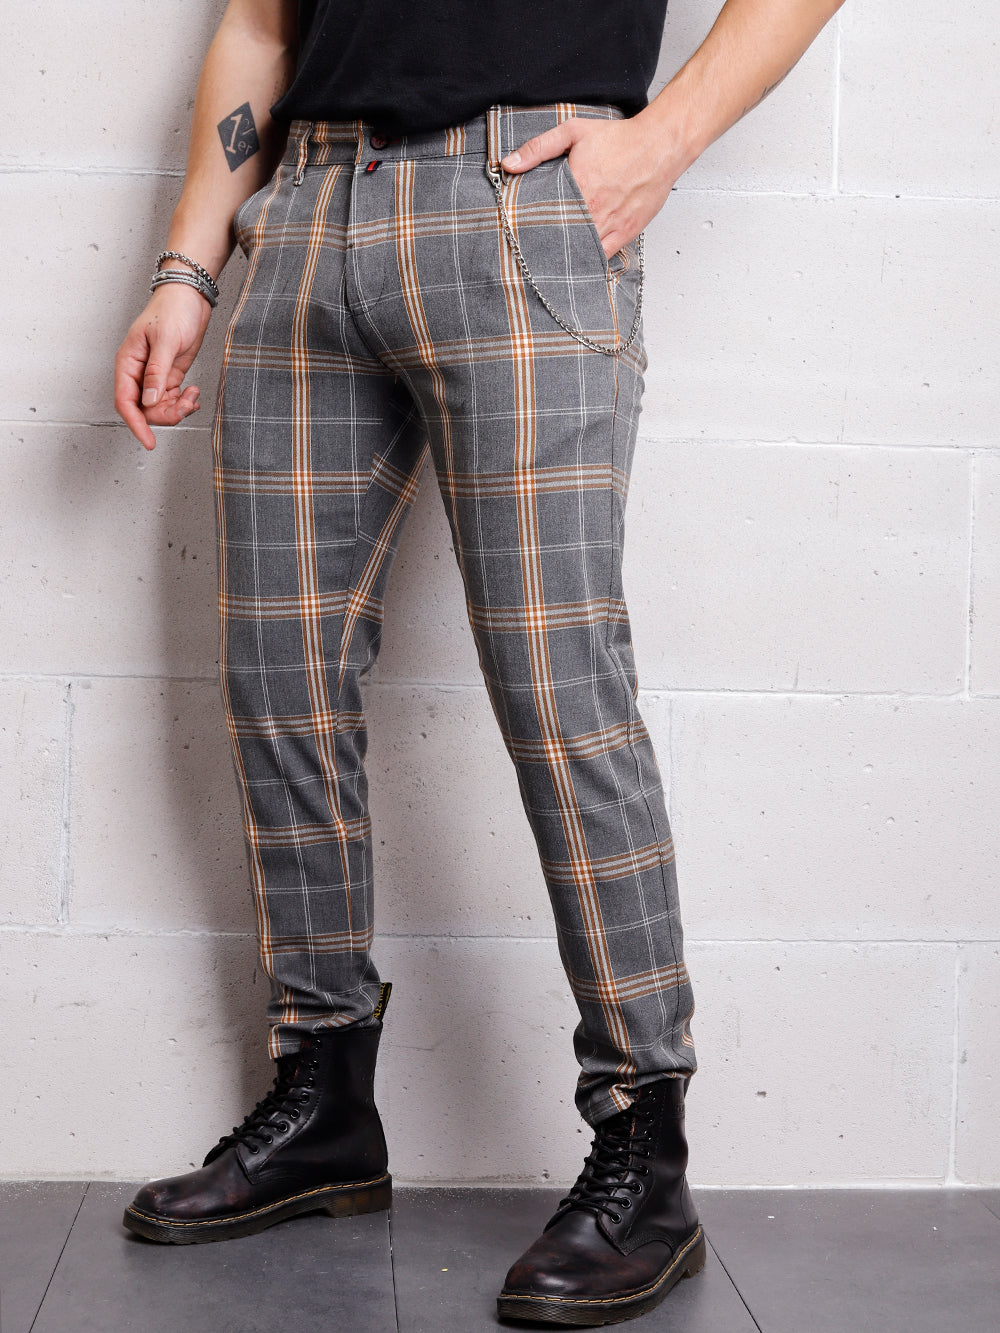 A man in slim fit CHECKERED STONE trouser pants standing against a wall.